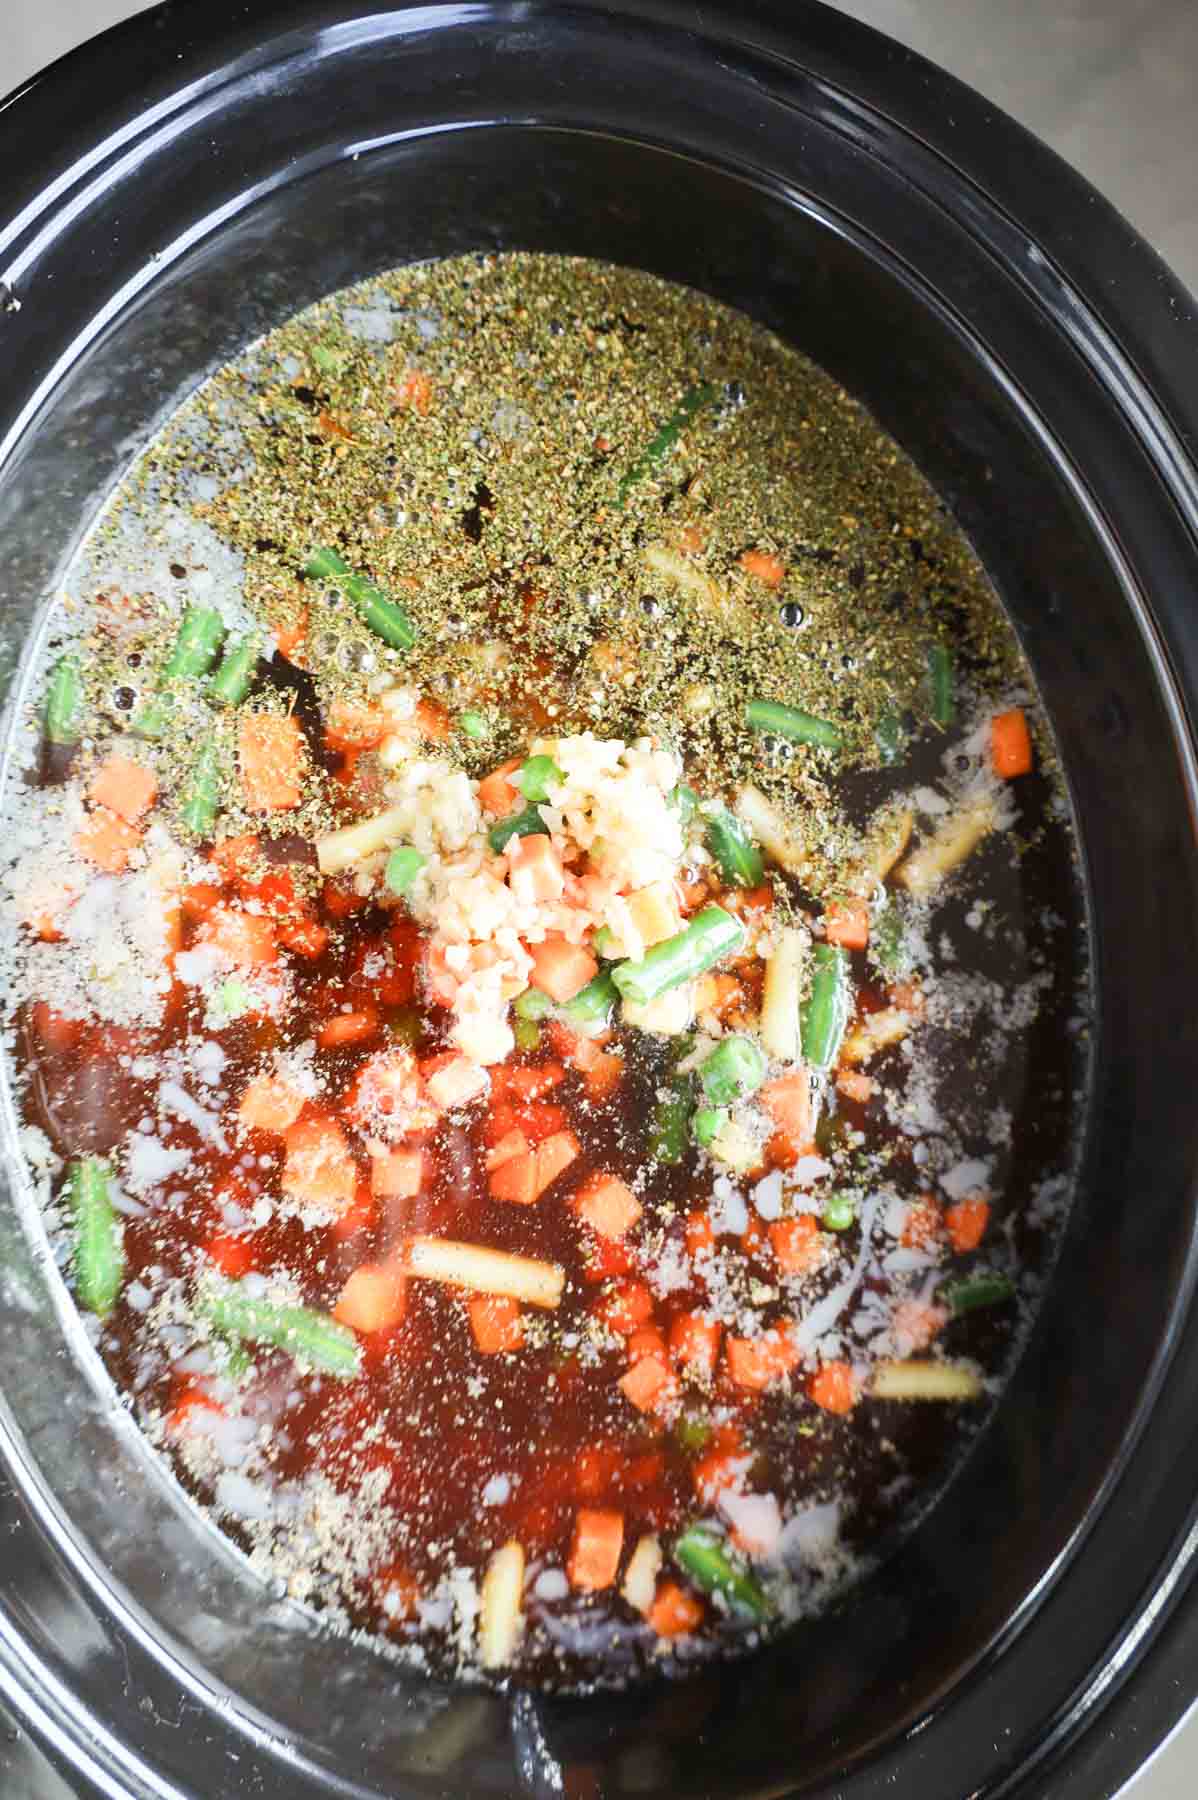 beef broth added to crock pot with frozen mixed veggies, diced tomatoes and cooked ground beef